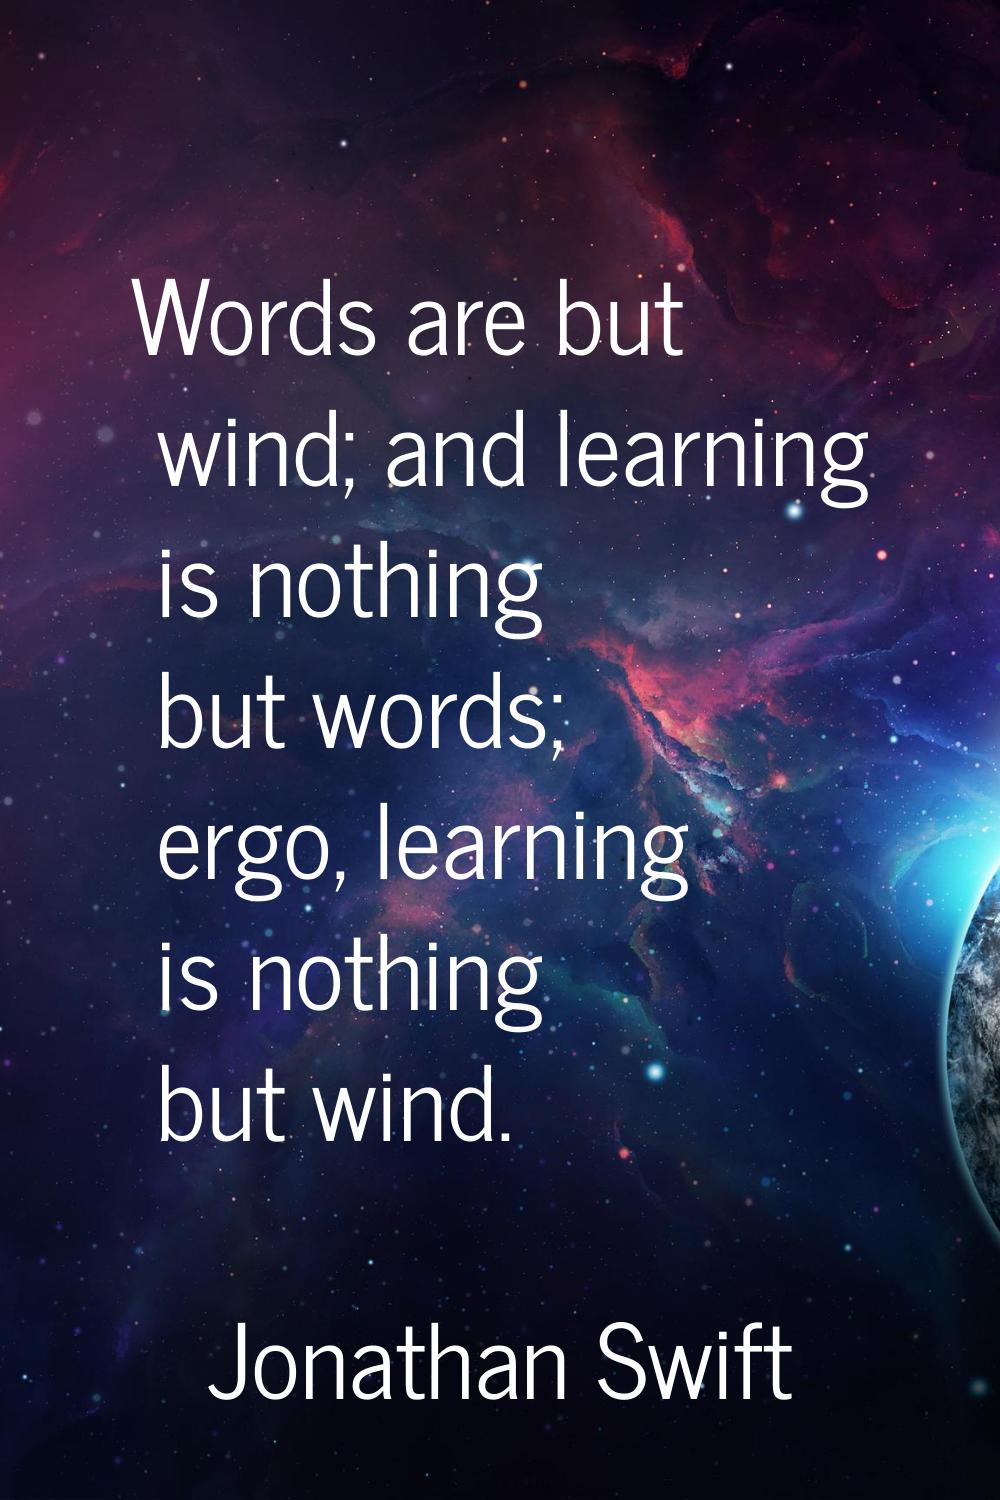 Words are but wind; and learning is nothing but words; ergo, learning is nothing but wind.